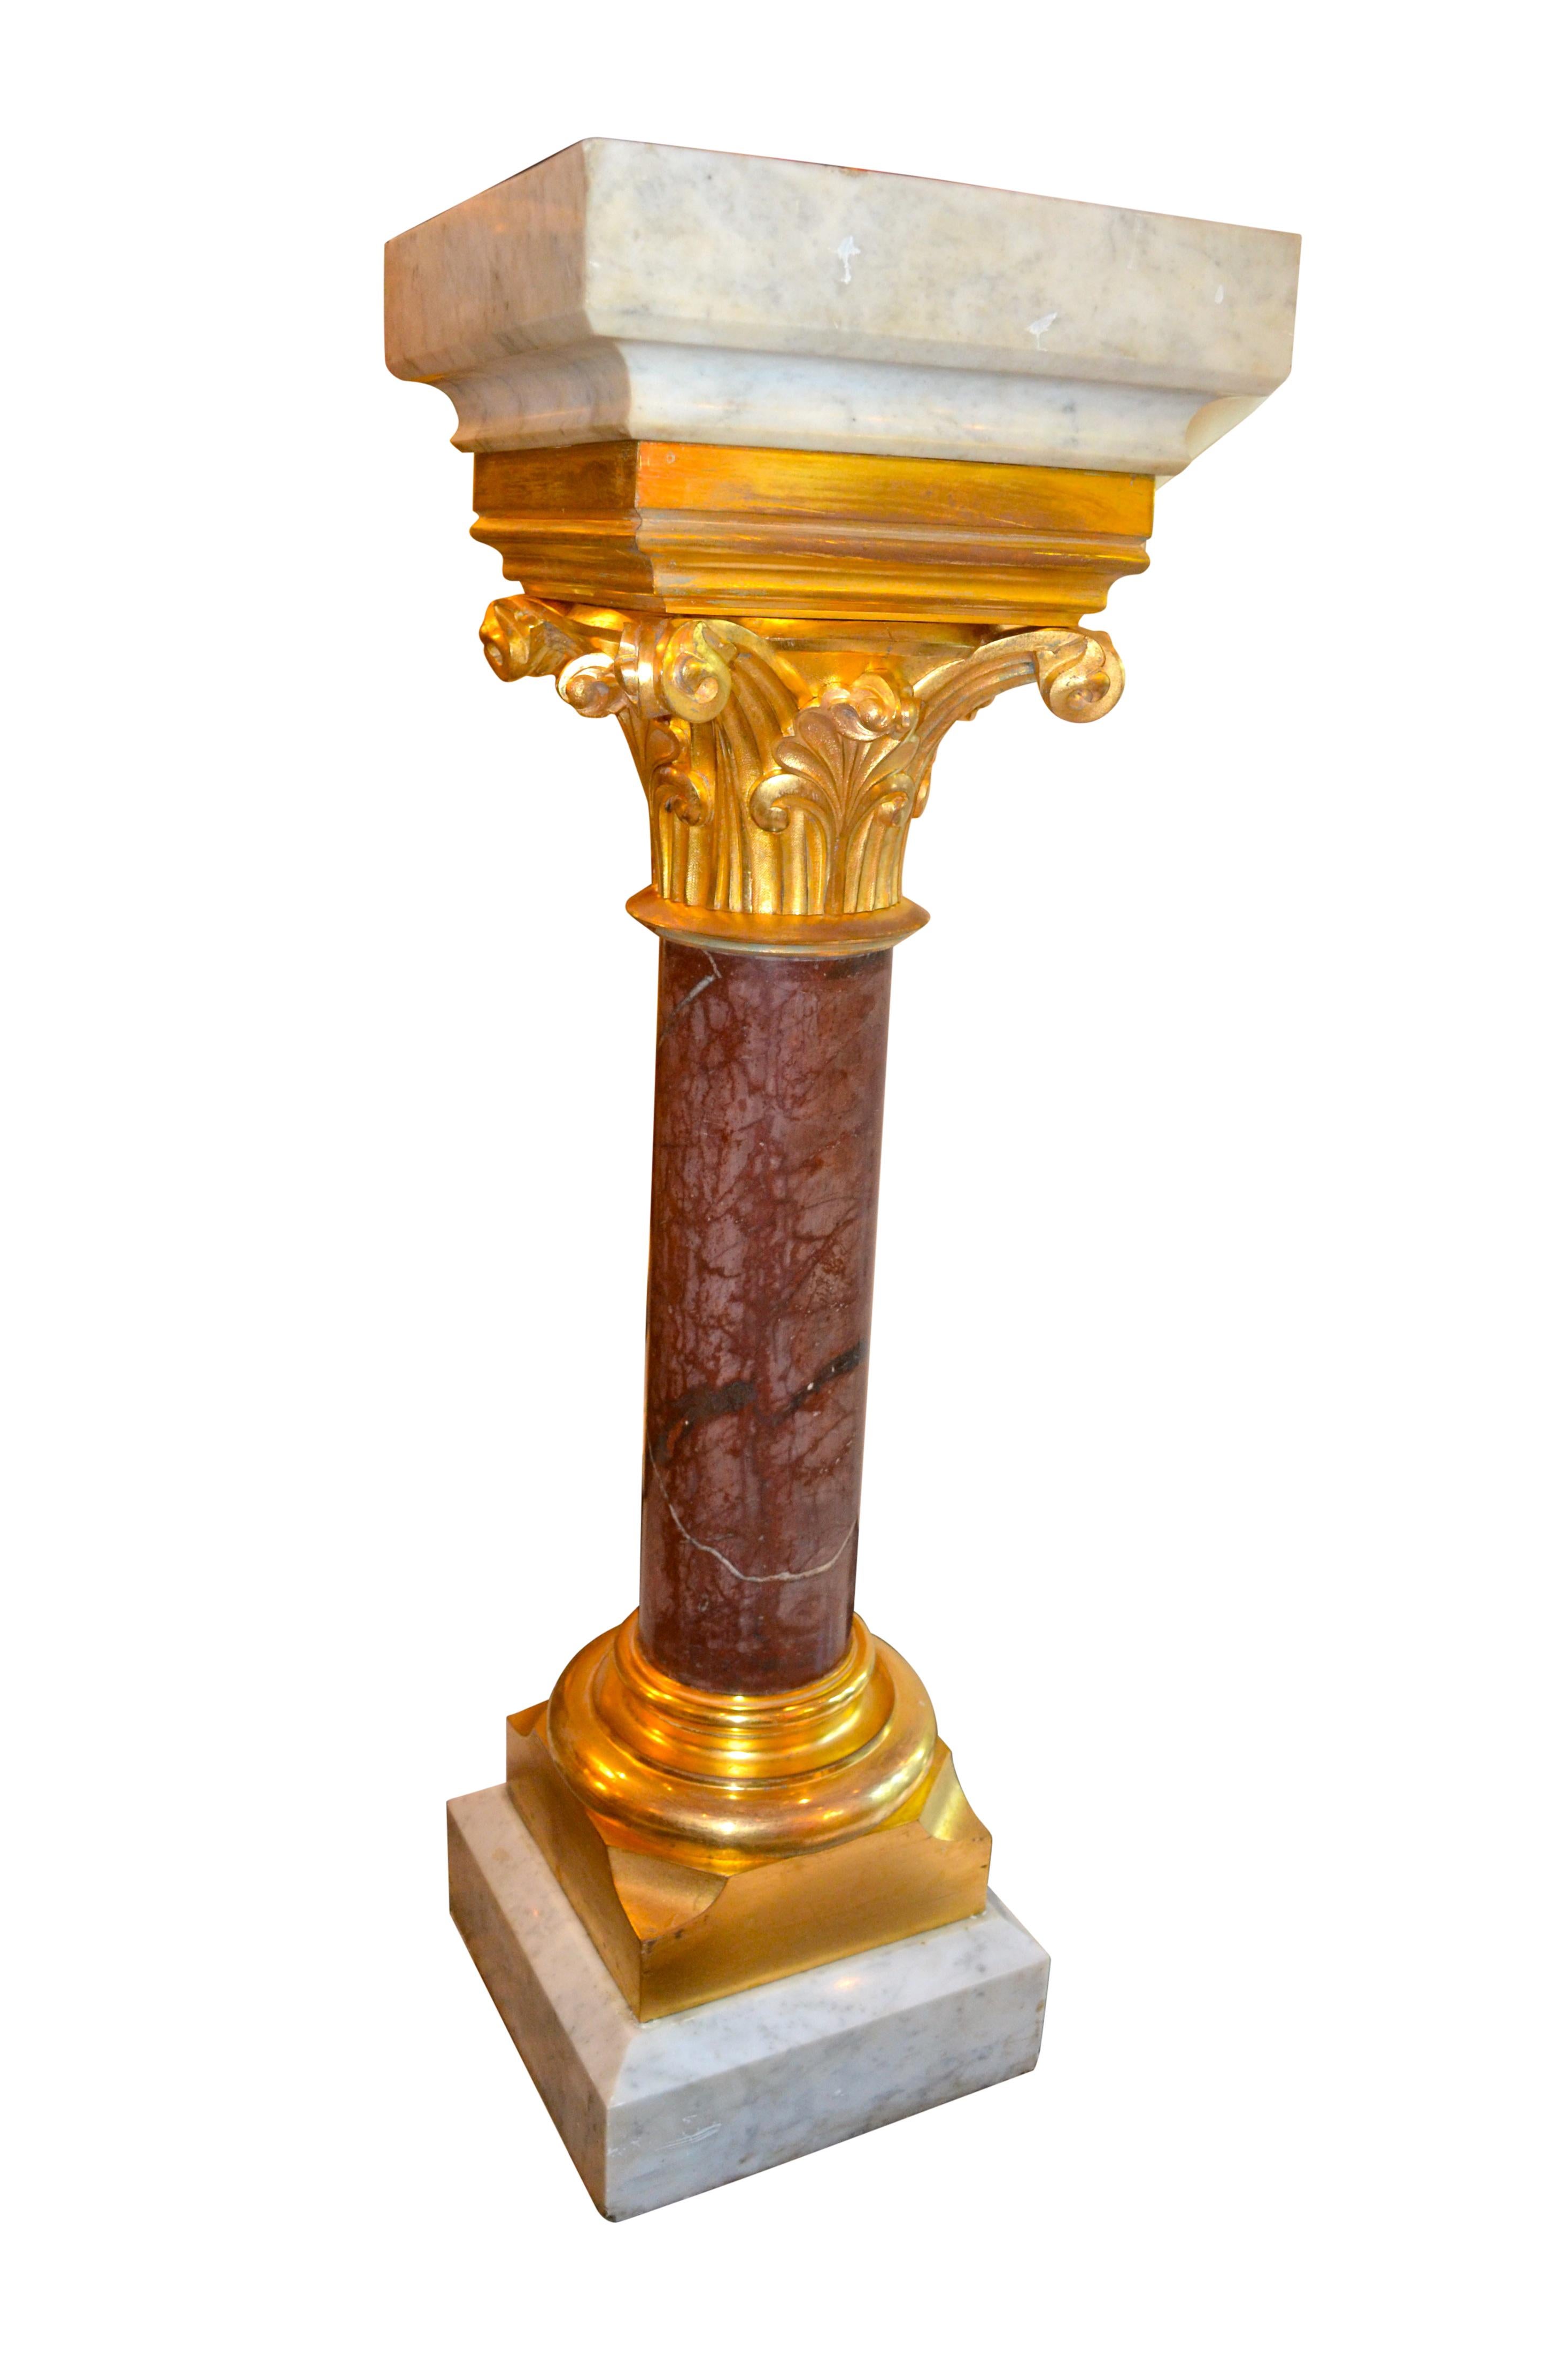 A dark red/brown circular marble column with a large gilded bronze Corinthian capital and a \r gilded bronze 